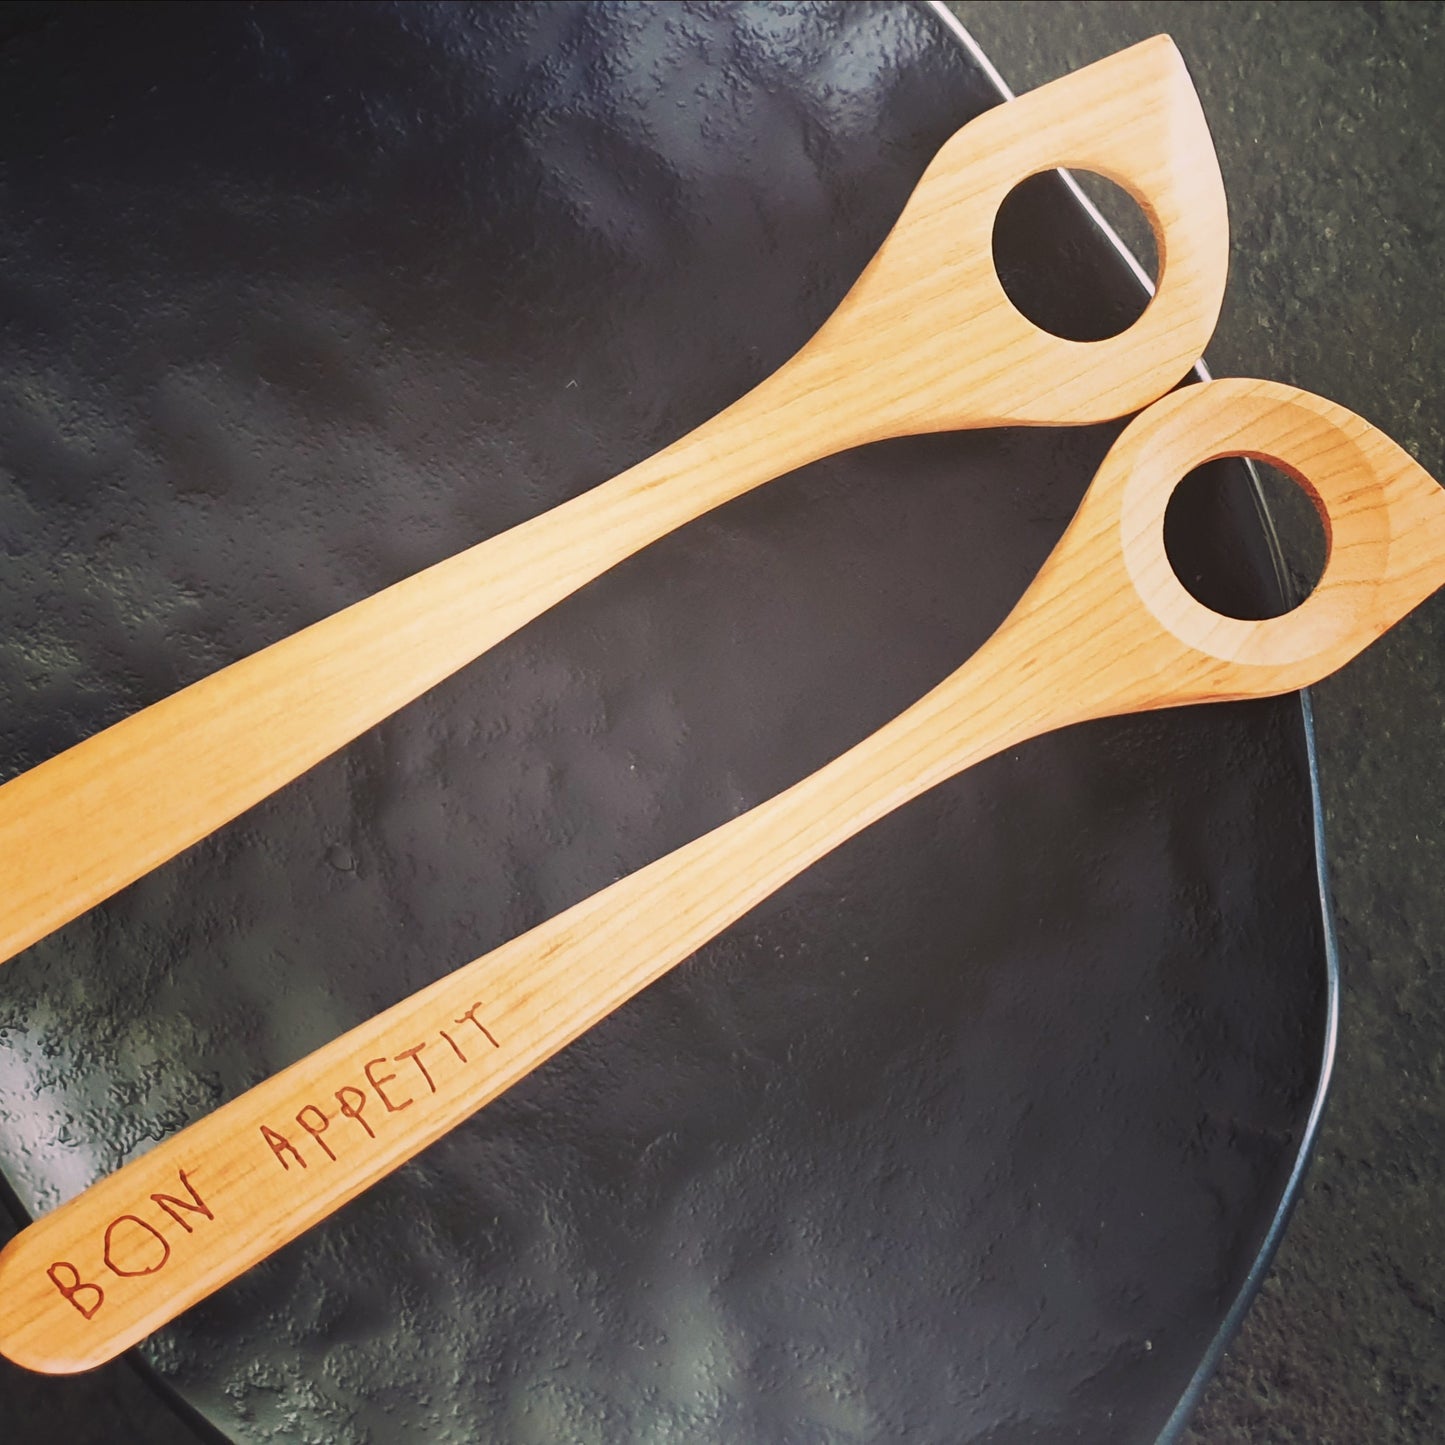 5 Wooden Spatula "Choose your word"